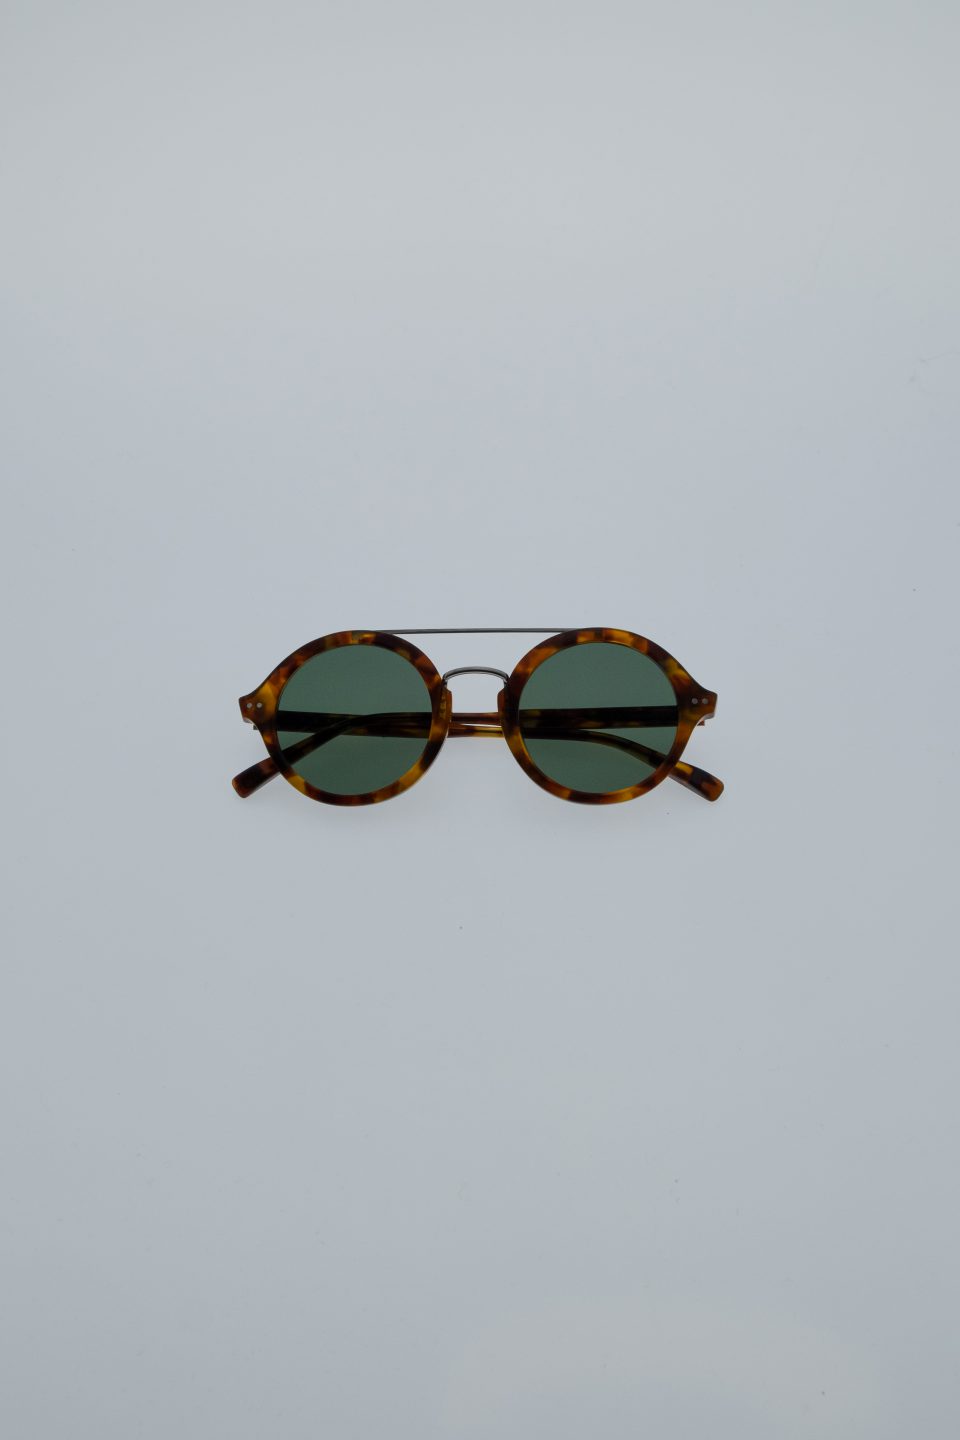 Wally in Tortoise with Green Lens